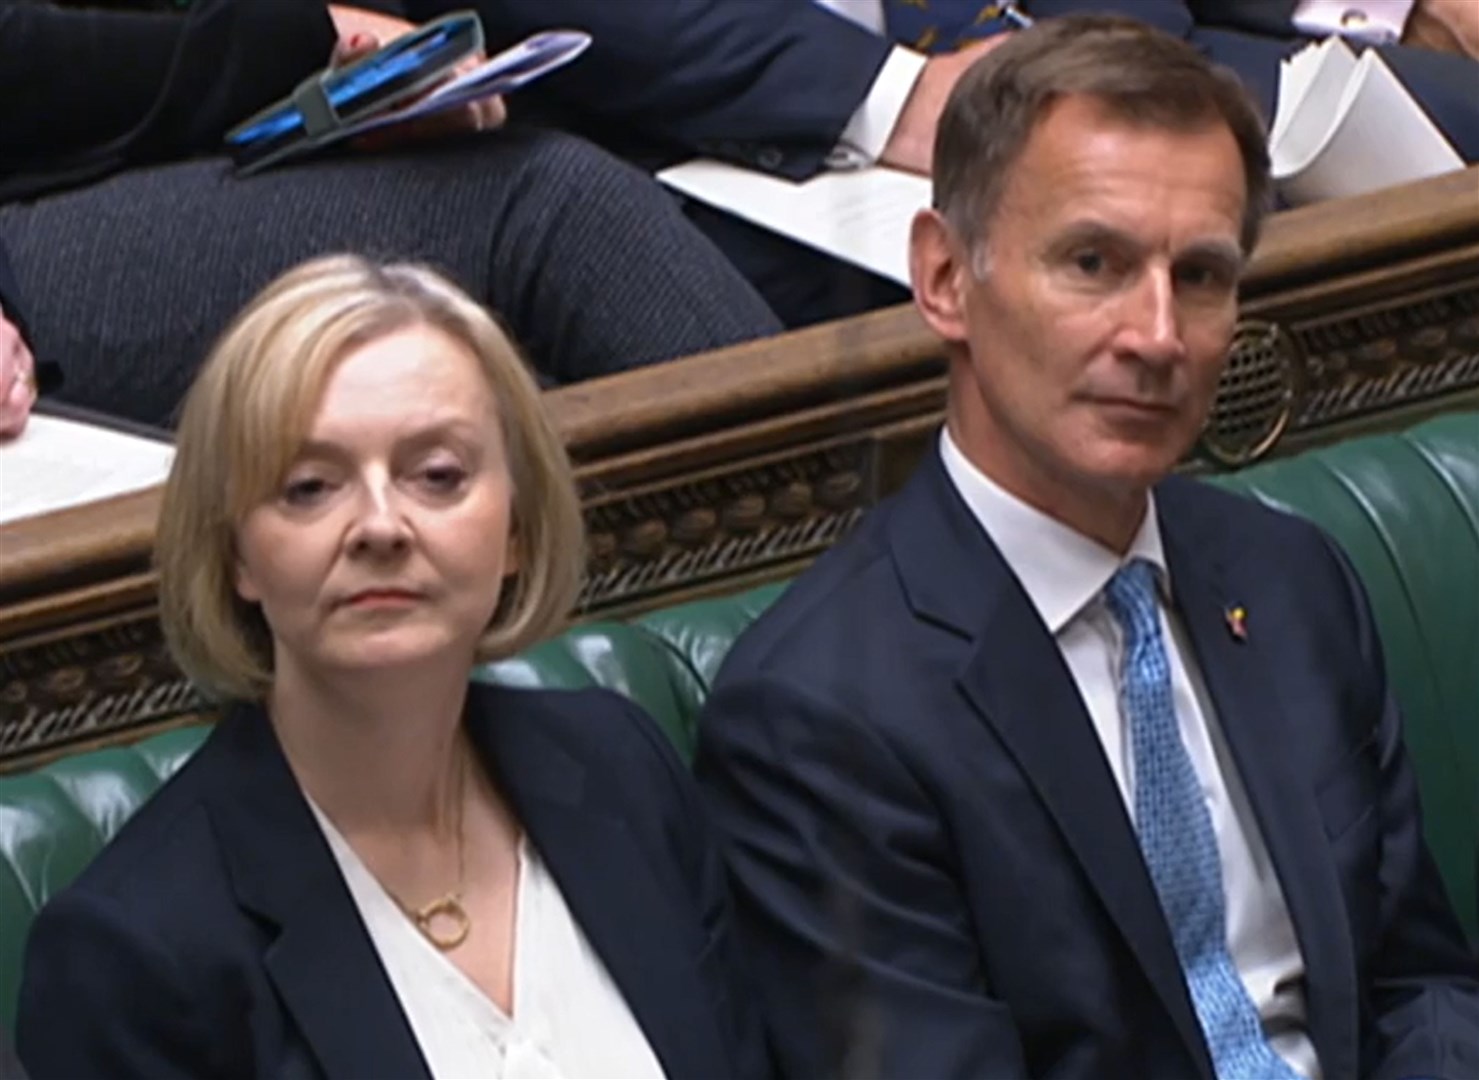 Jeremy Hunt was brought in by Liz Truss in the aftermath of the mini-budget (House of Commons/PA)